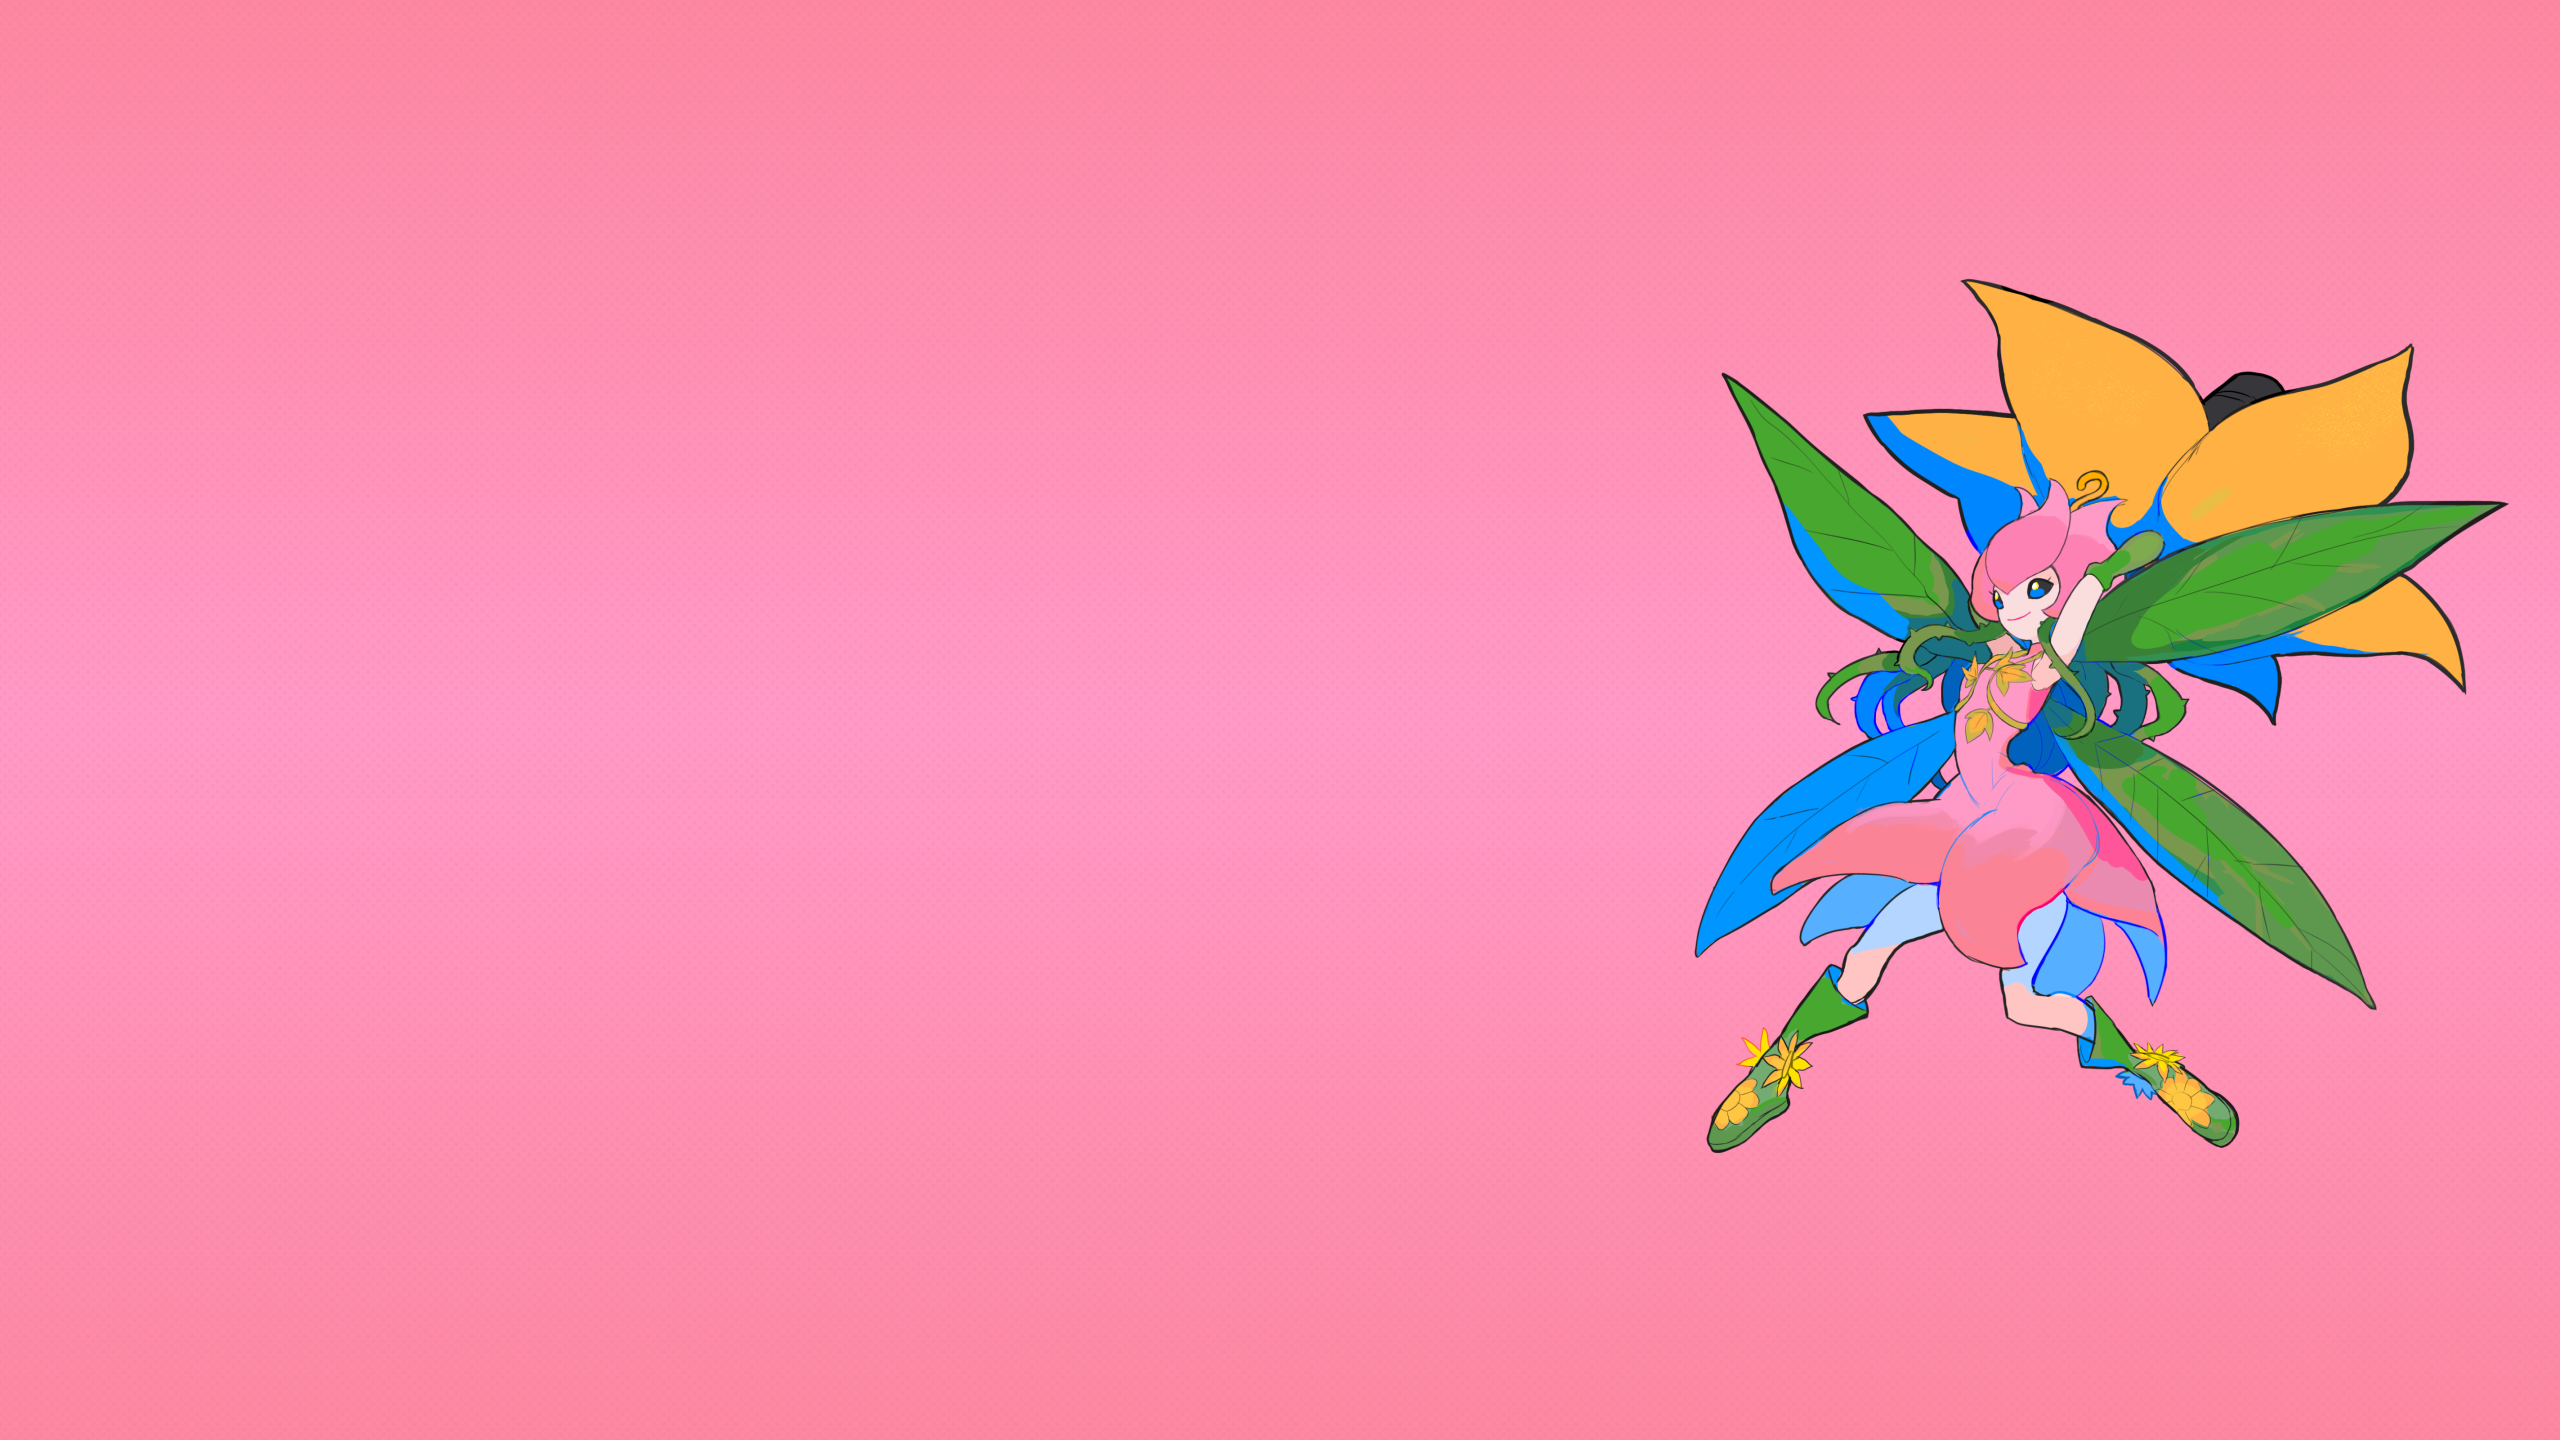 Anime 2560x1440 anime girls simple background Digimon Adventure Digimon Lillymon (Digimon) flowers pink background skirt boots fictional character blue eyes fairies wings plants fictional creatures vines thorns leaves